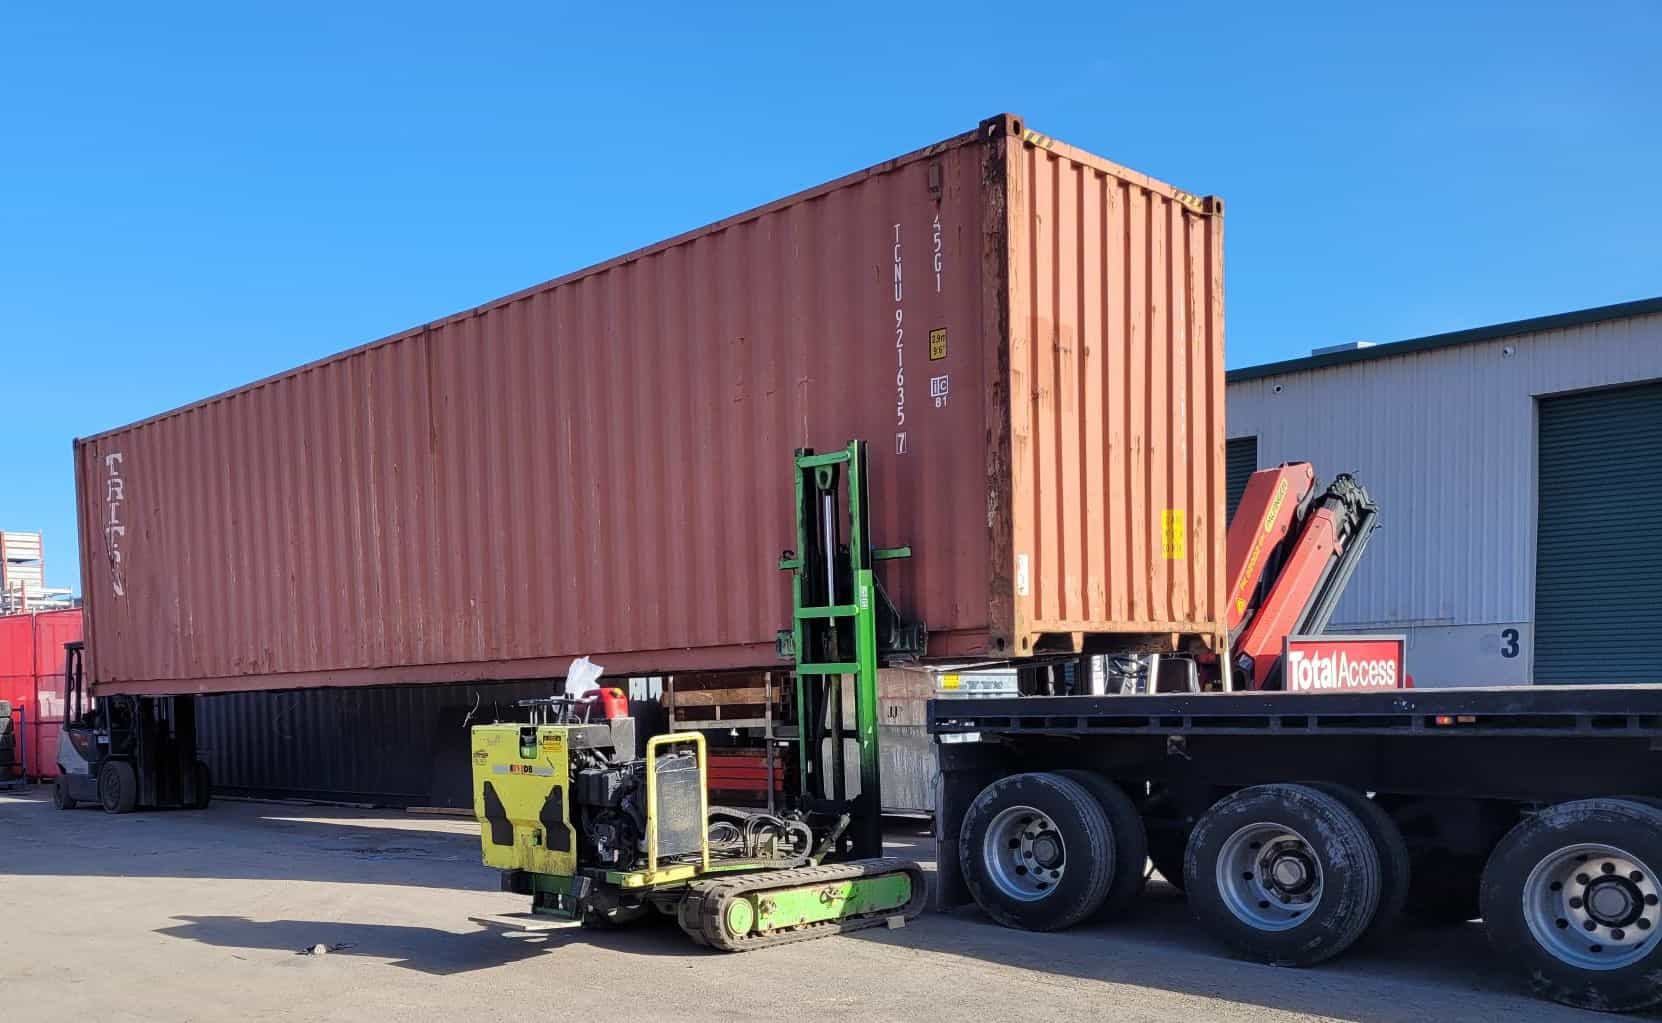 Depot Services - Tracked fork & container